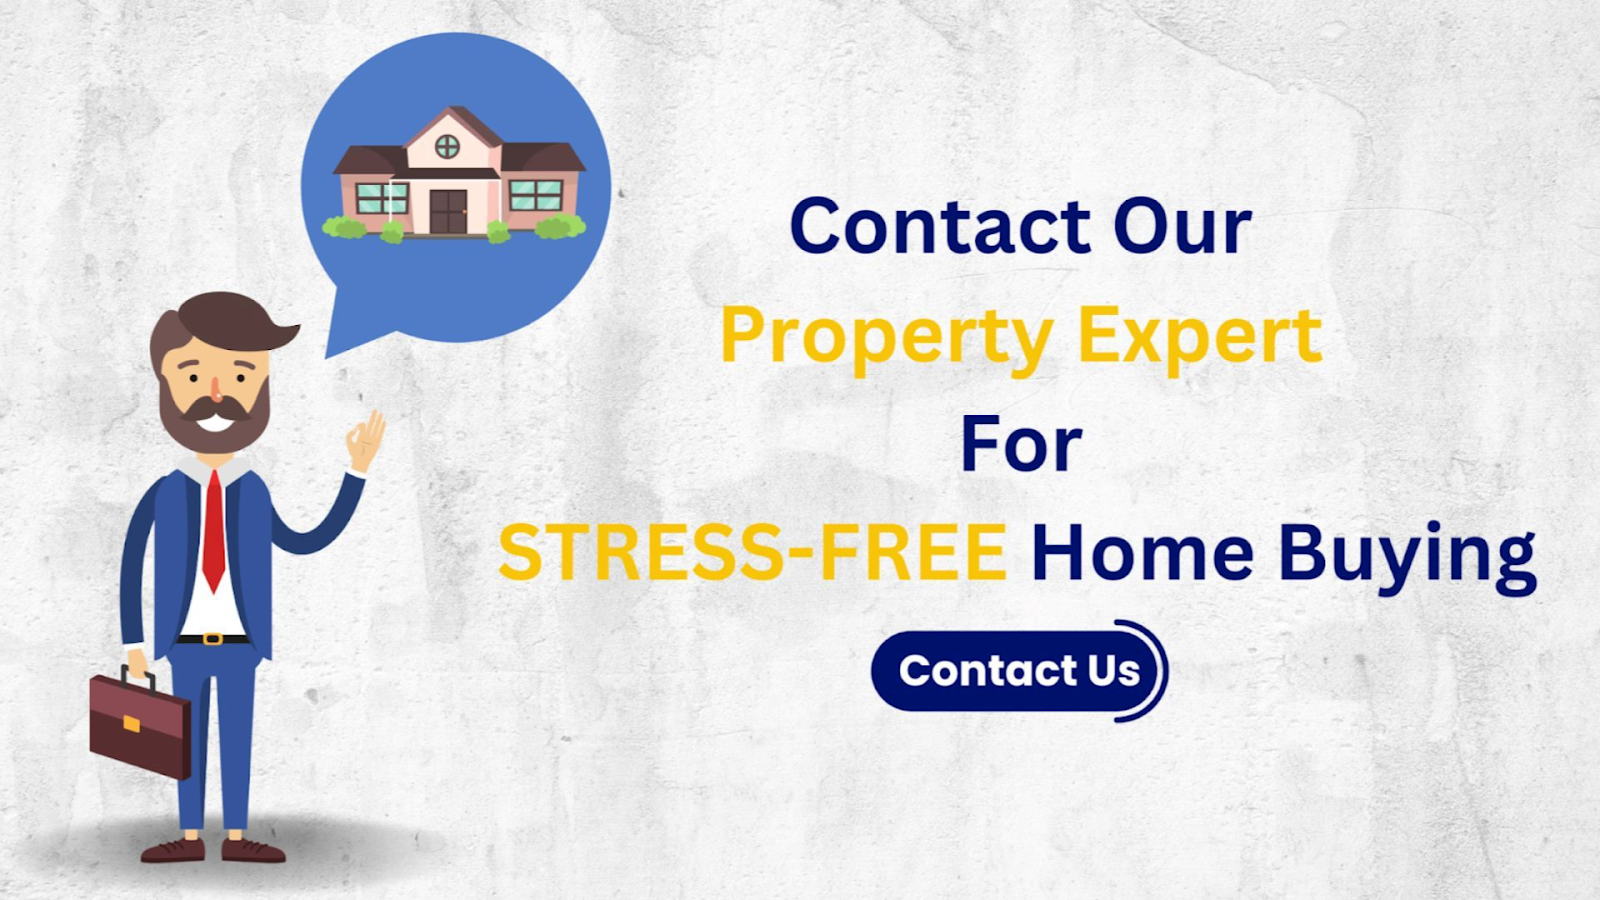 Contact PropertyCloud and buy your dream property stress-free.